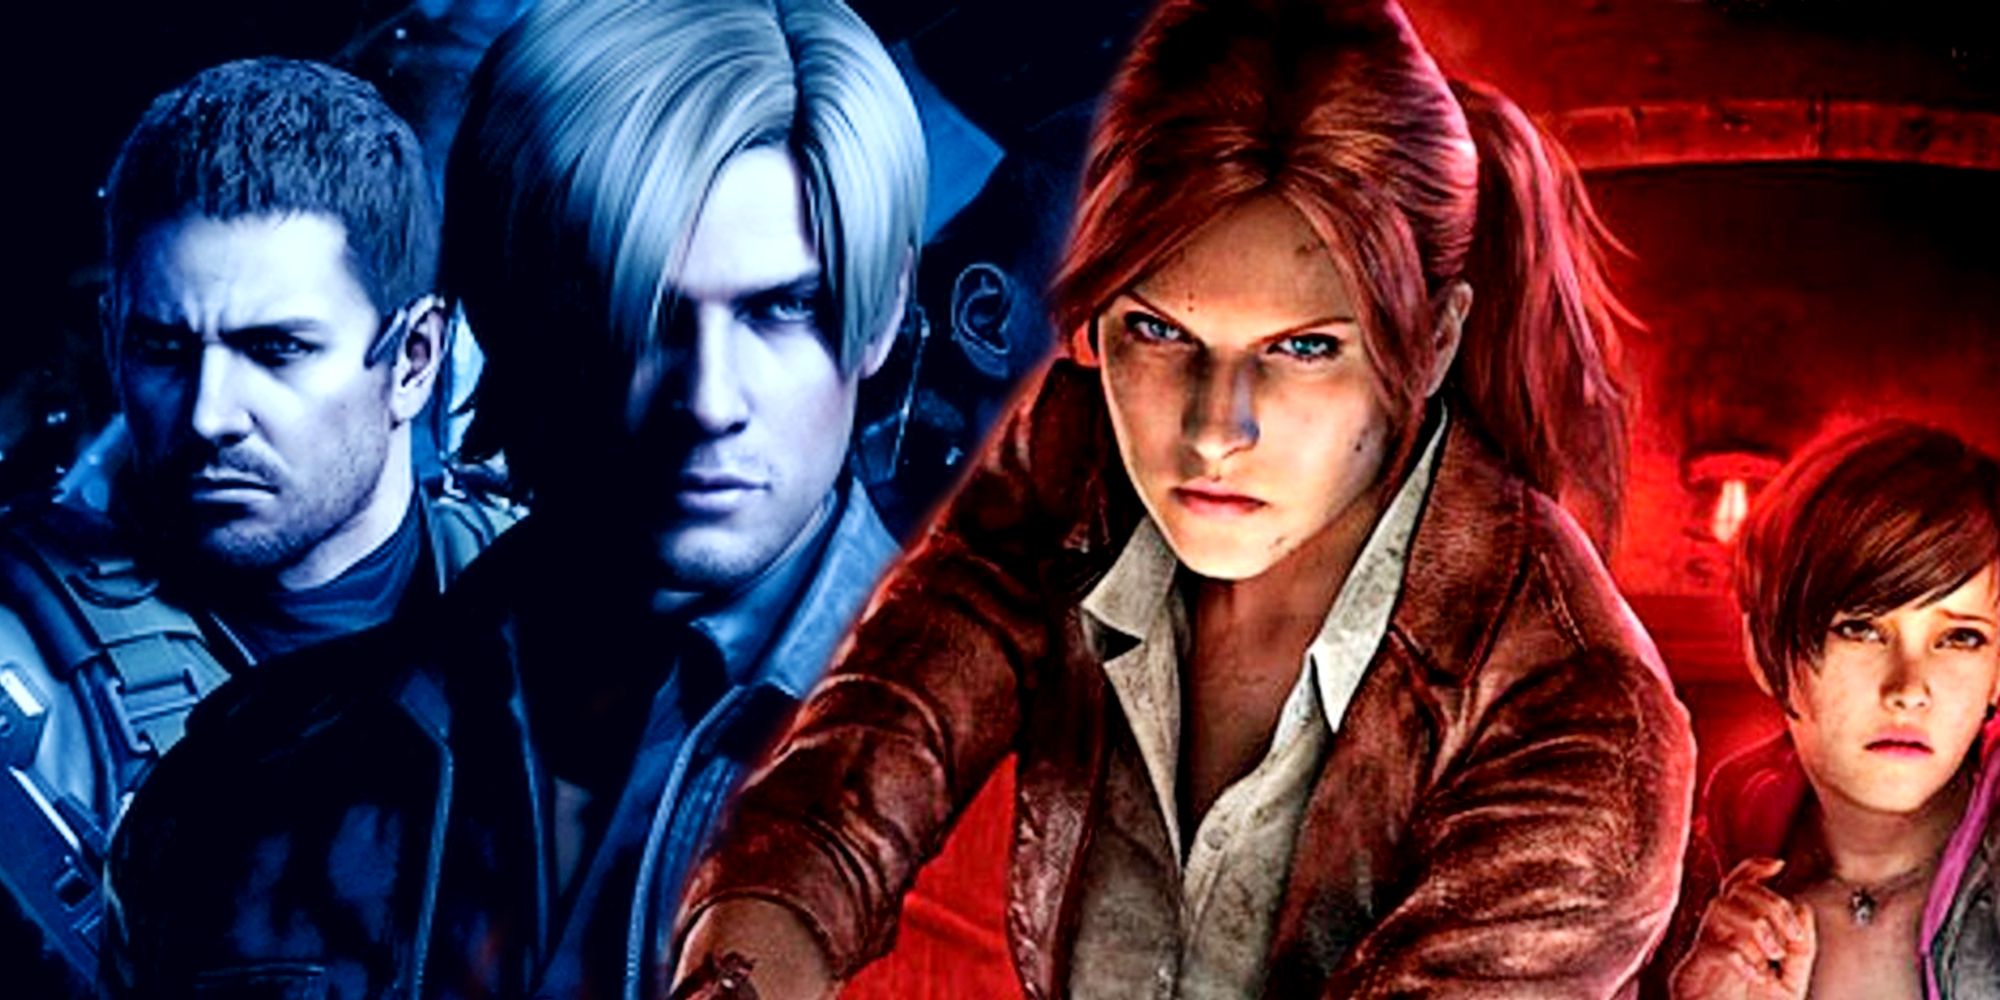 Resident Evil What Happens Next For Leon & Claire After Infinite Darkness